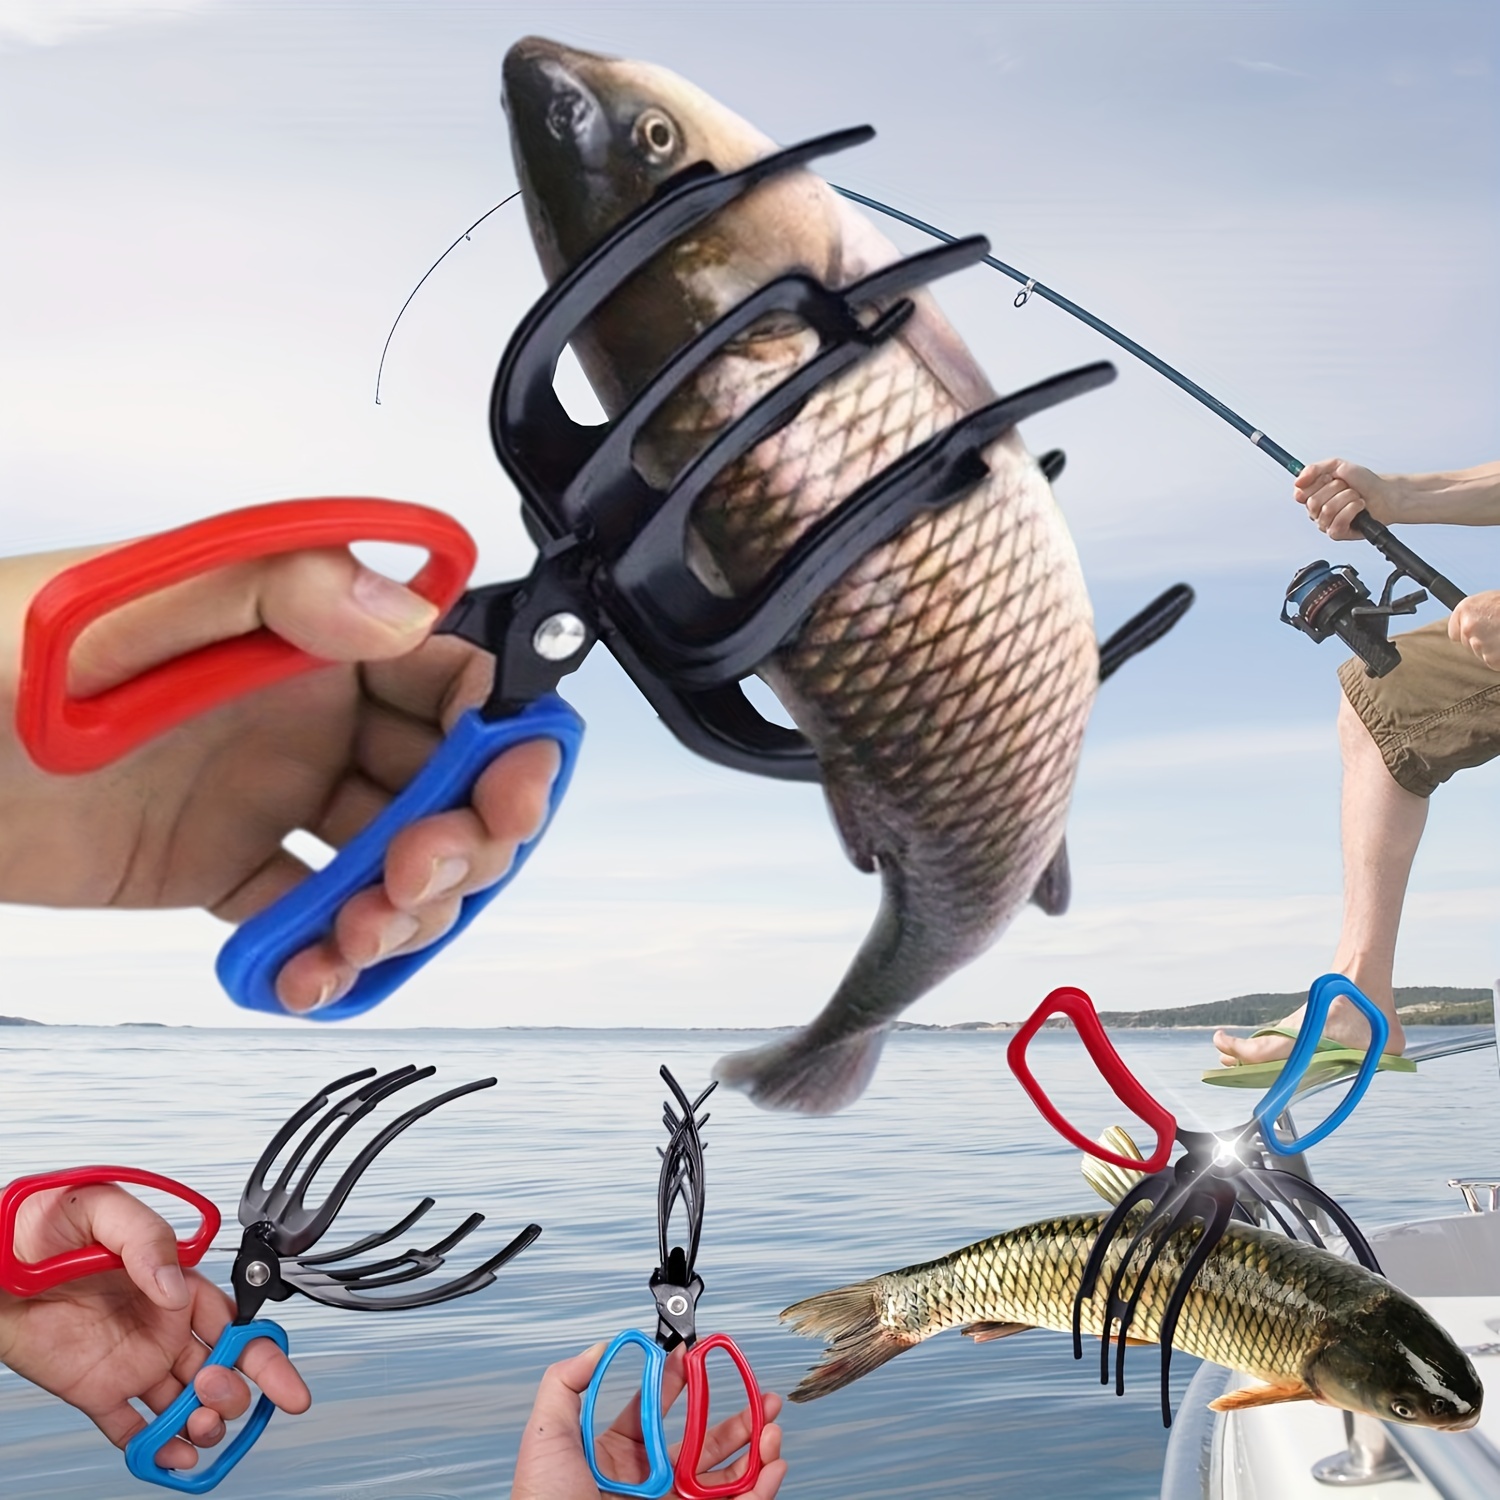 Portable Fish Grip Grab Catch Mouth Lip Gripper Grabber Catcher Fishing  Tackle Tools Mini stainless steel fish control_Black + rope + white box